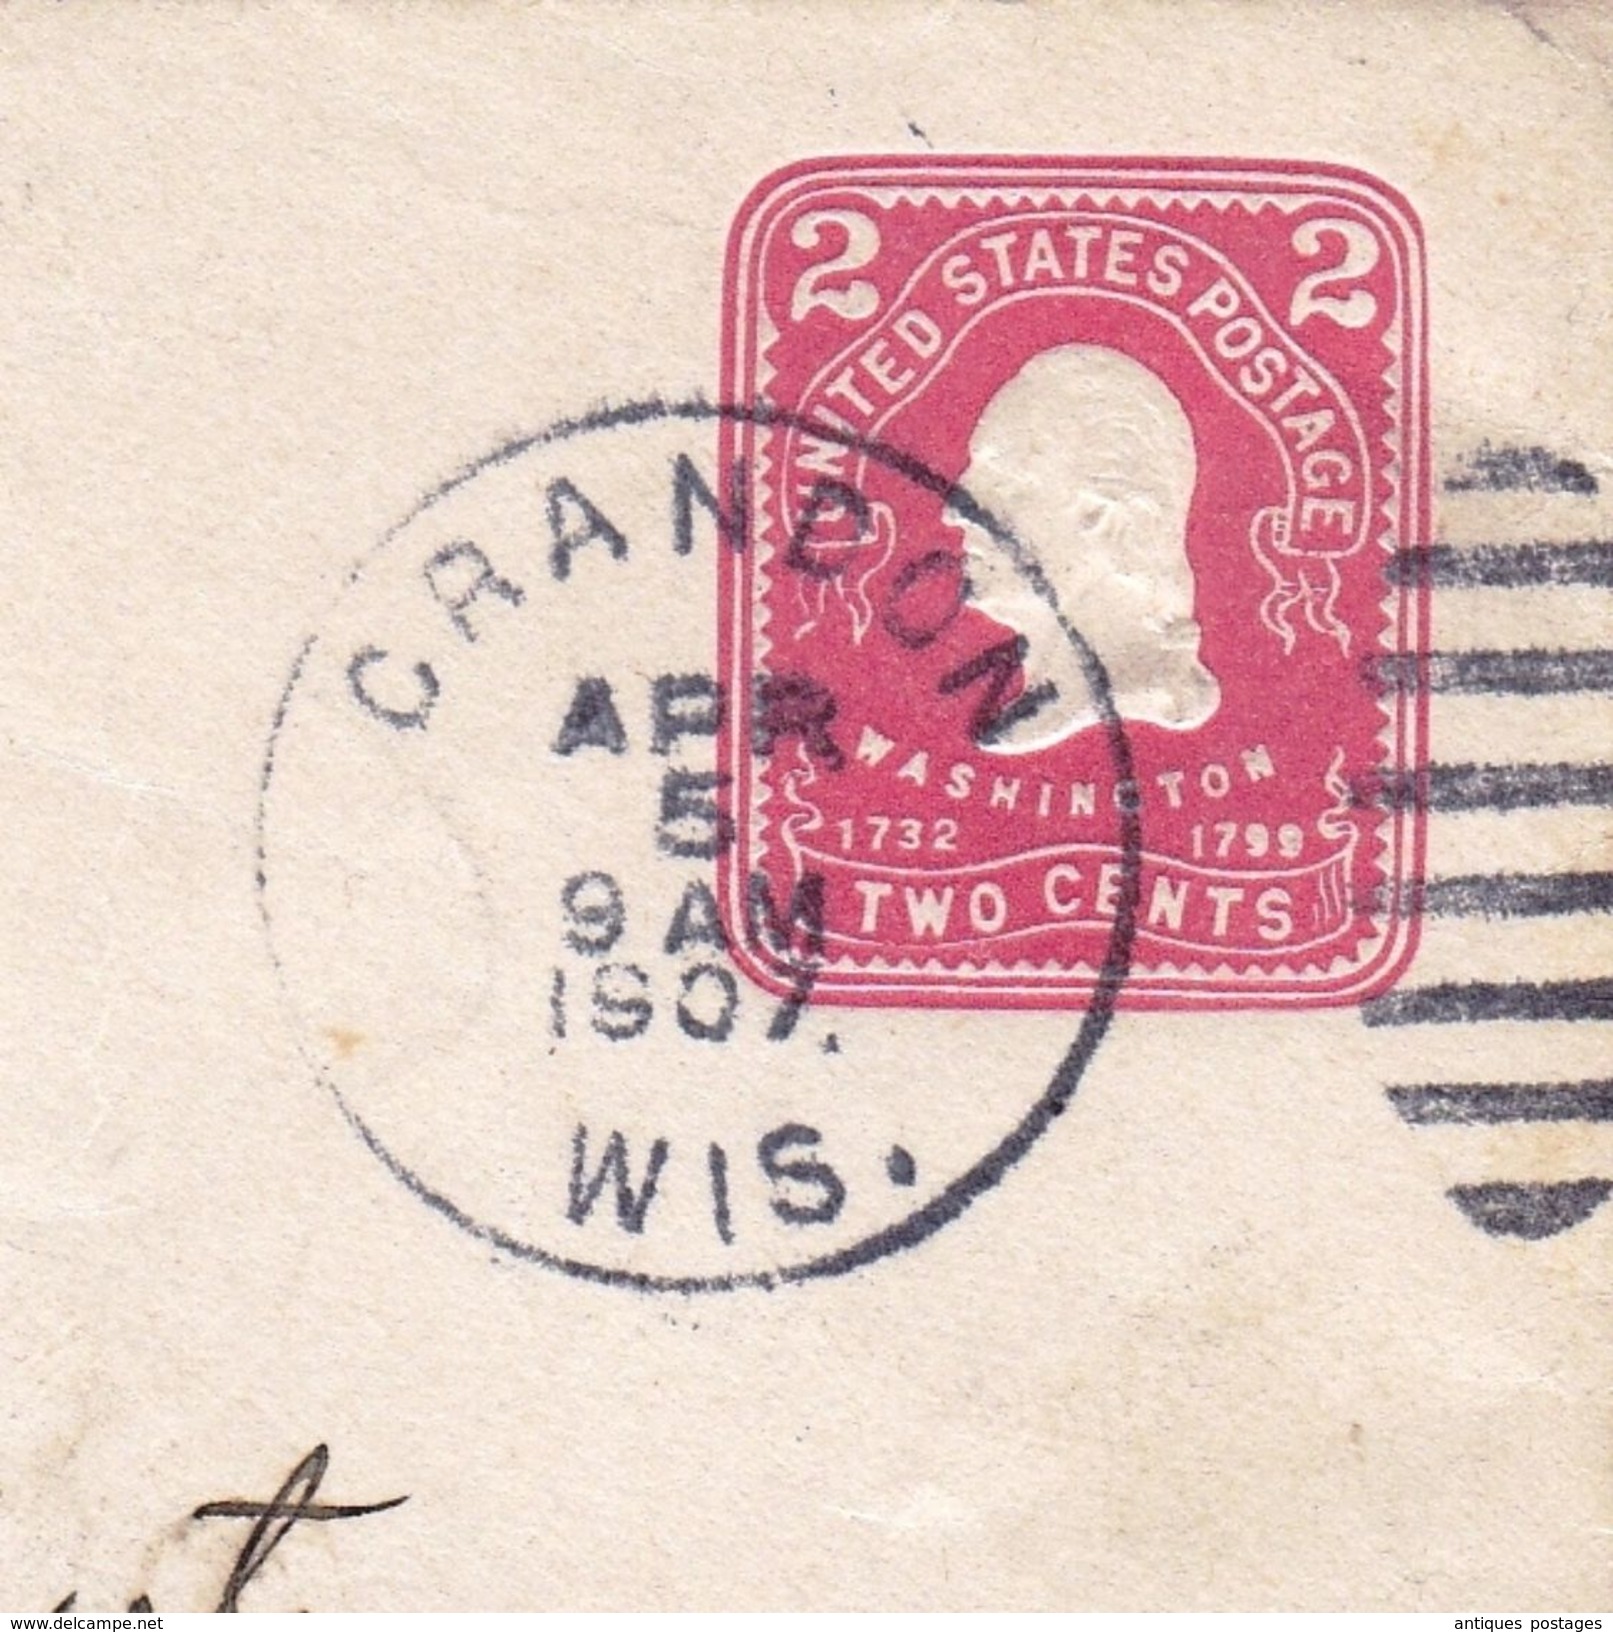 Lettre Entier Postal Crandon Wisconsin USA The Page Landeck Lumber Co. 1907 Two Cents George Washington New London - 1901-20